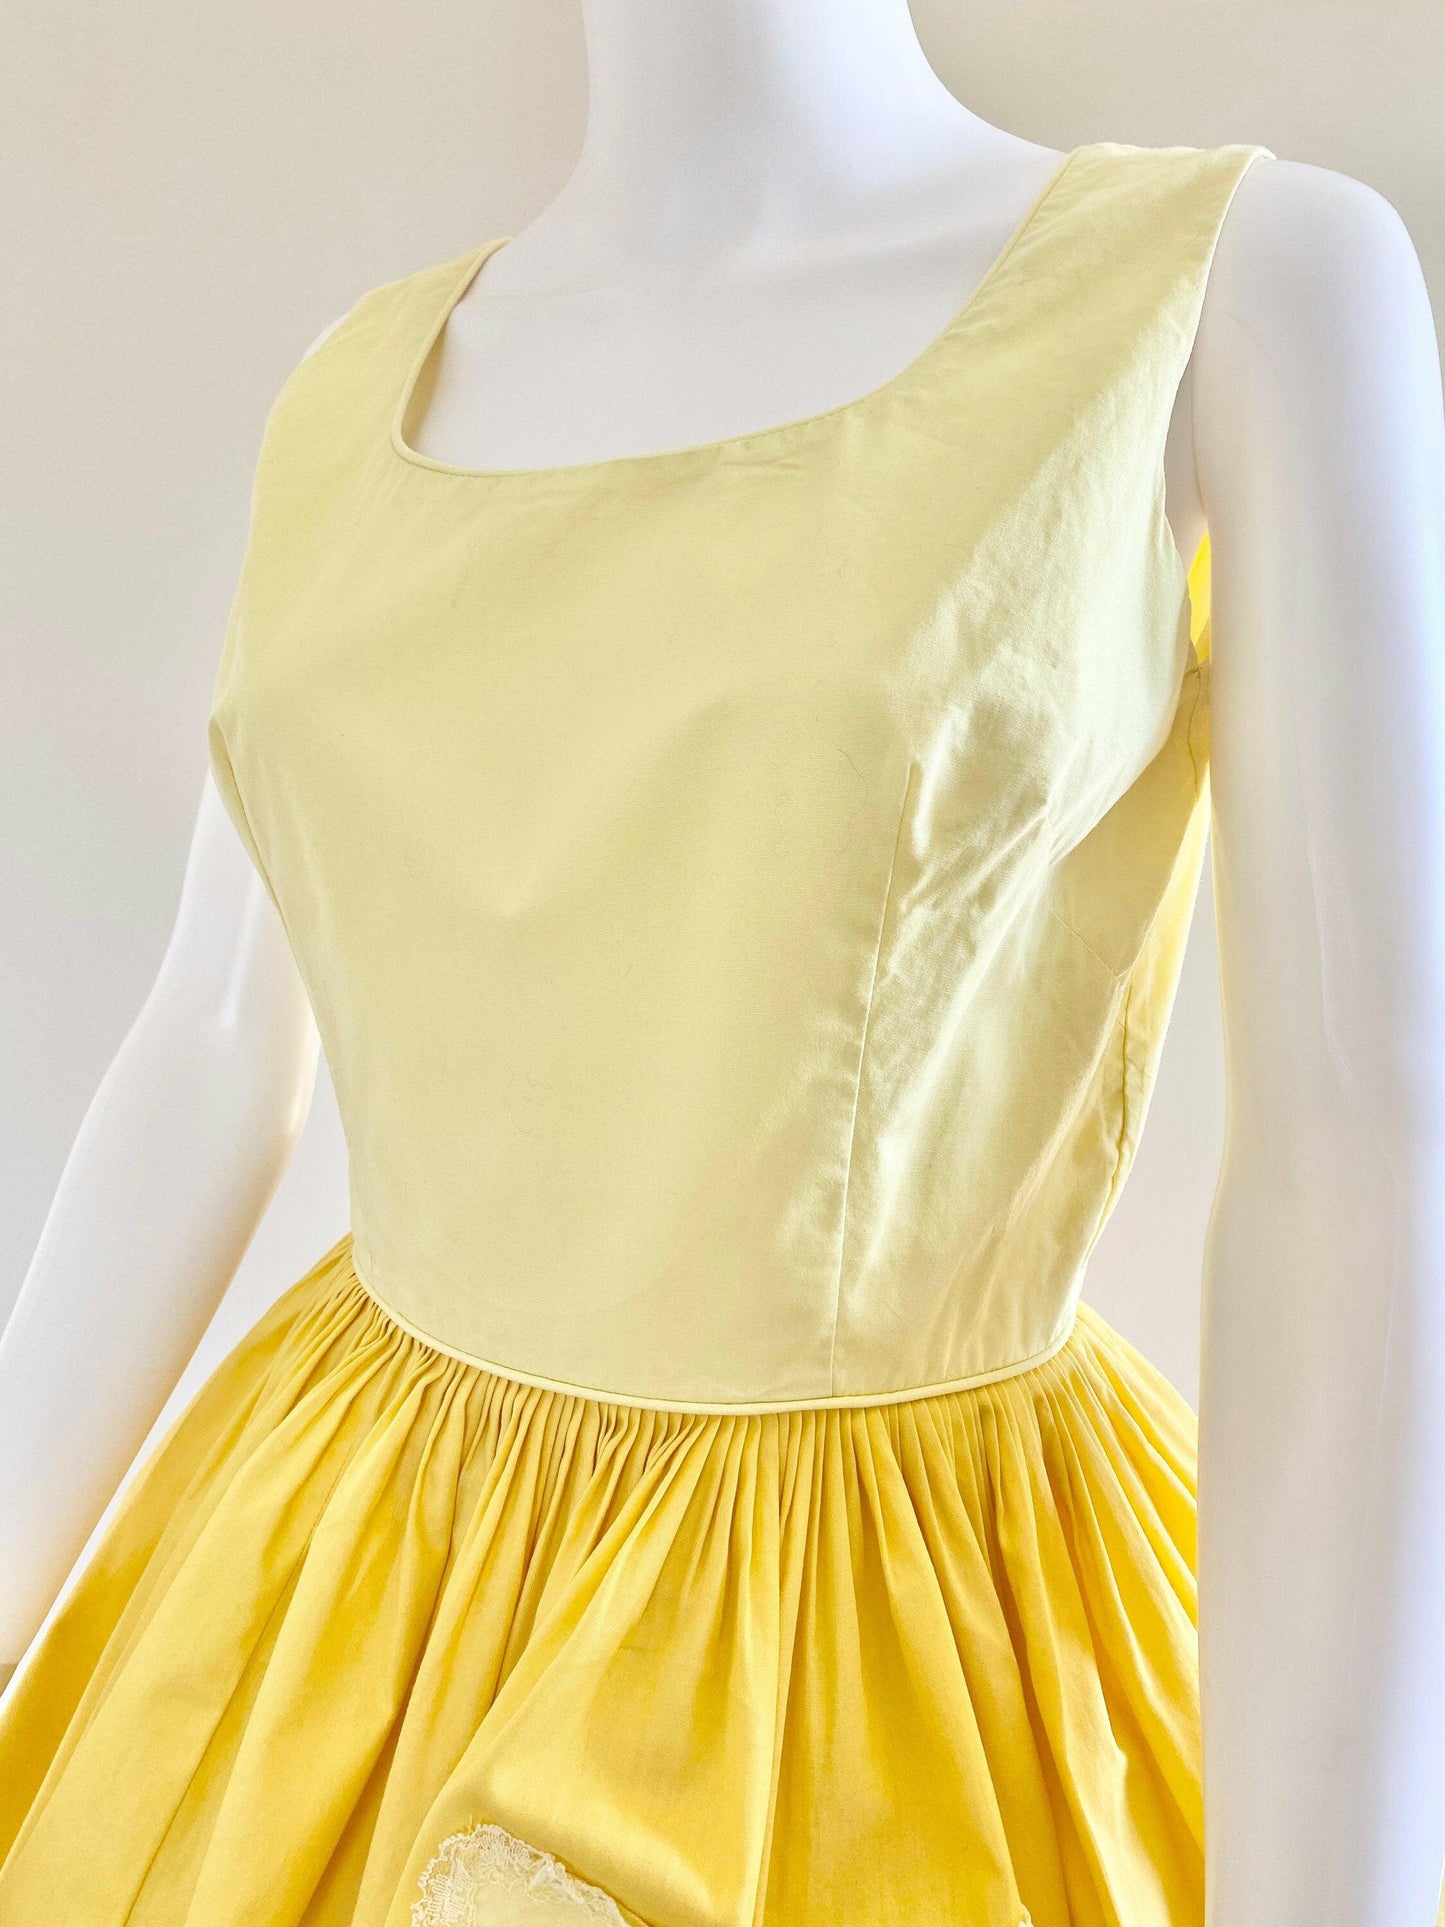 Vintage 1950s Yellow Cotton Sundress / 50s retro fit and flare full day dress / Size S